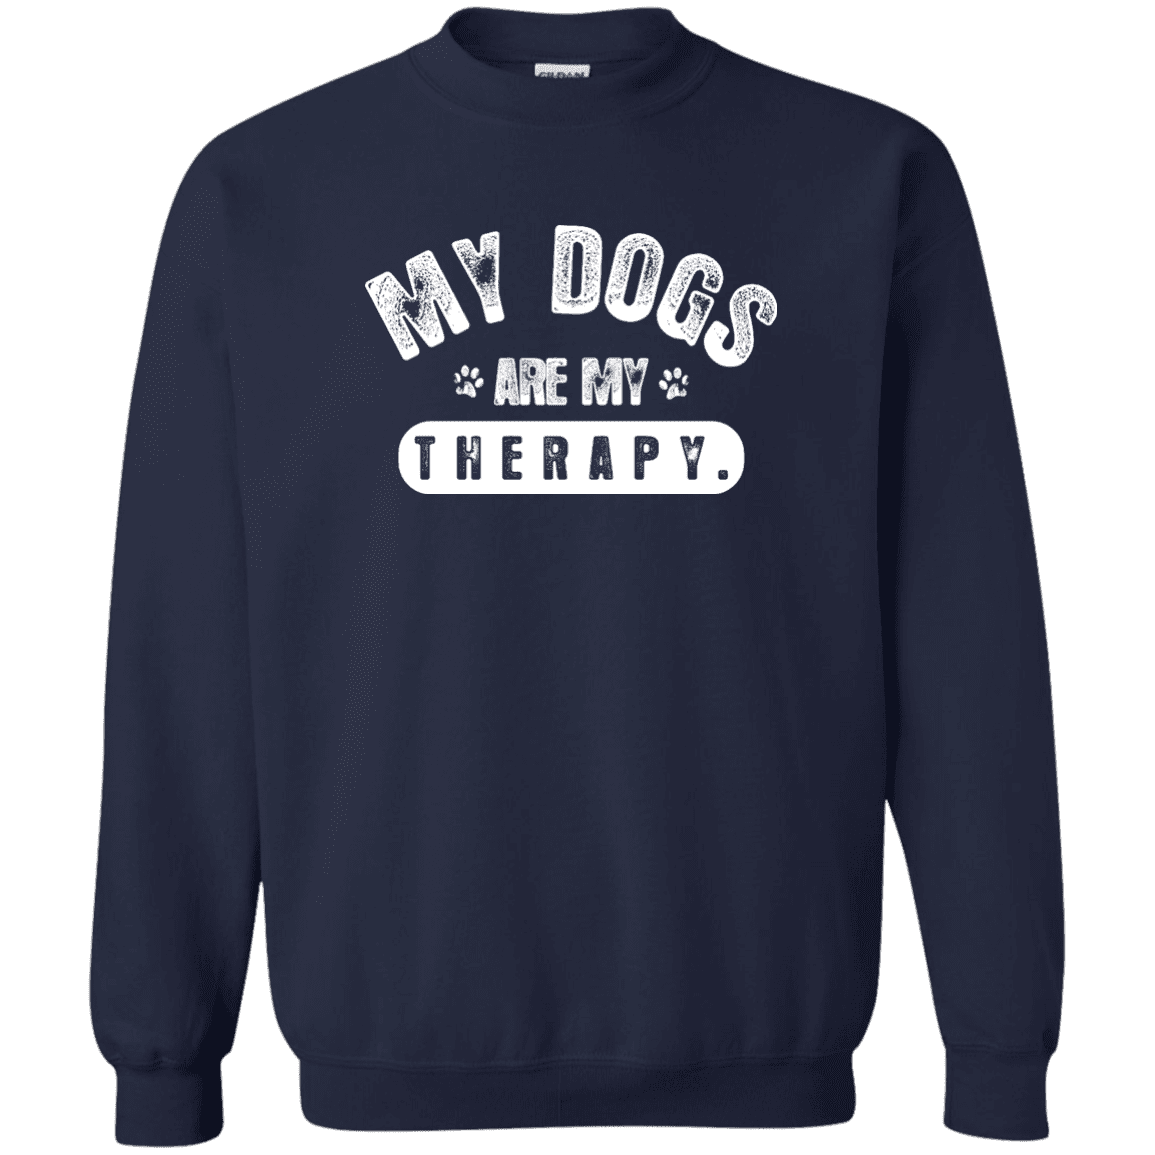 My Dogs Are My Therapy - Sweatshirt.